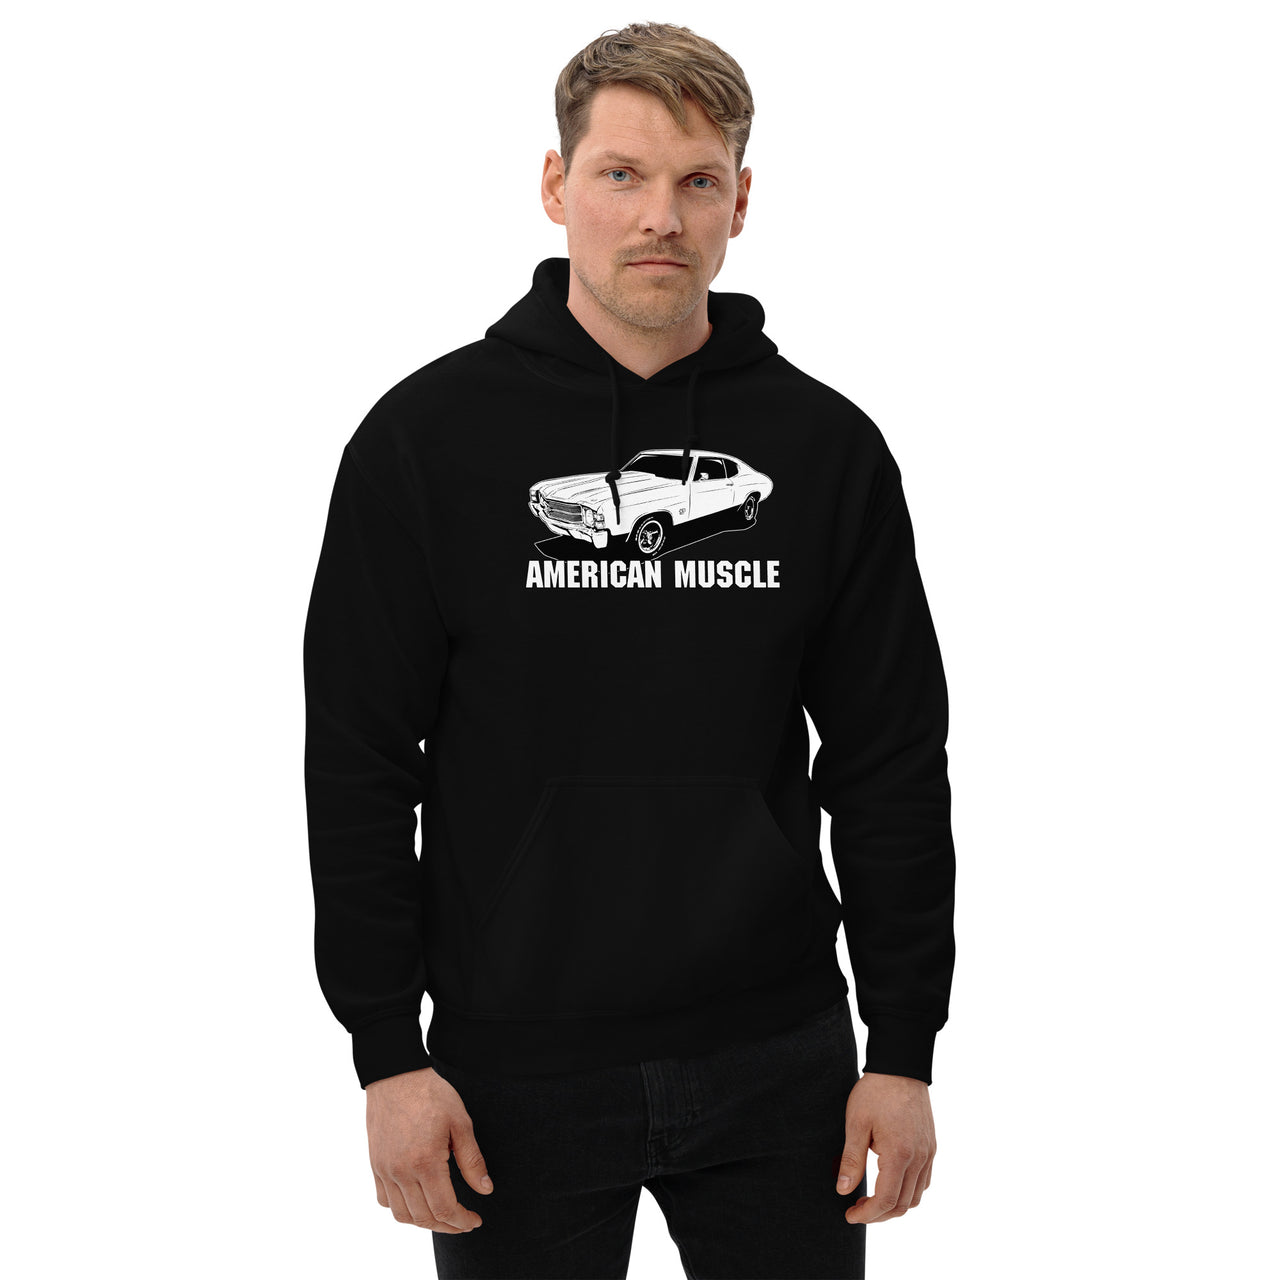 1971 Chevelle Car Hoodie modeled in black